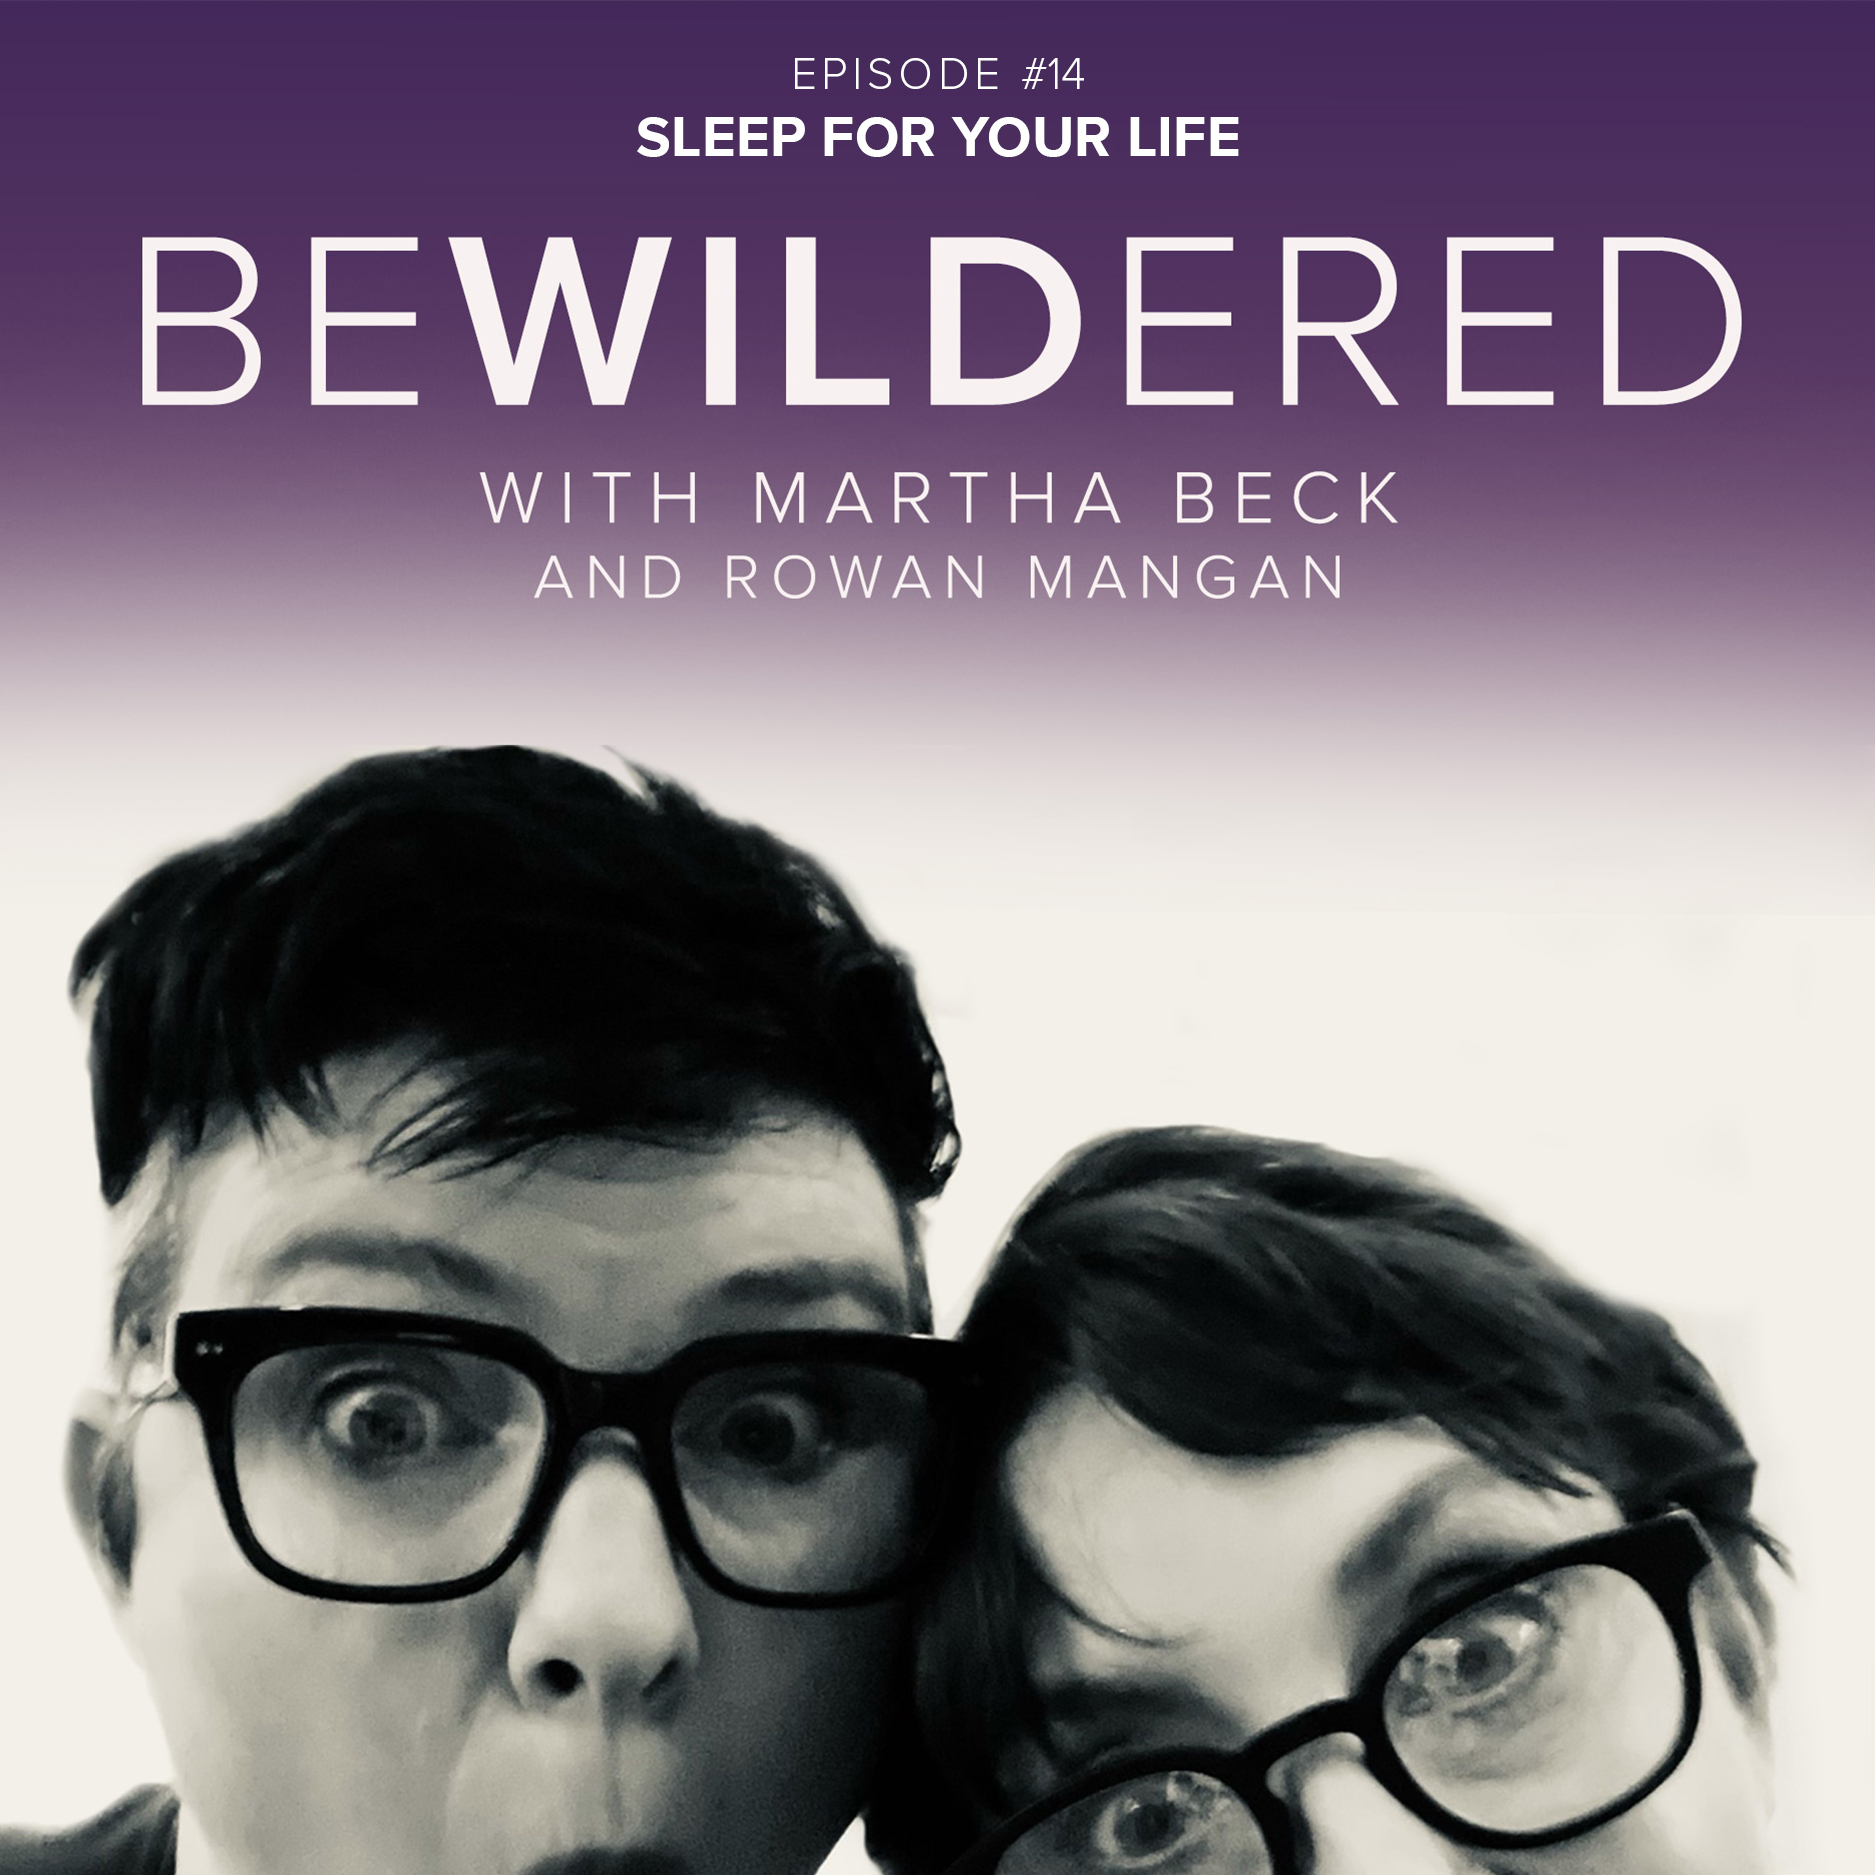 Image for Episode #14 Sleep For Your Life for the Bewildered Podcast with Martha Beck and Rowan Mangan